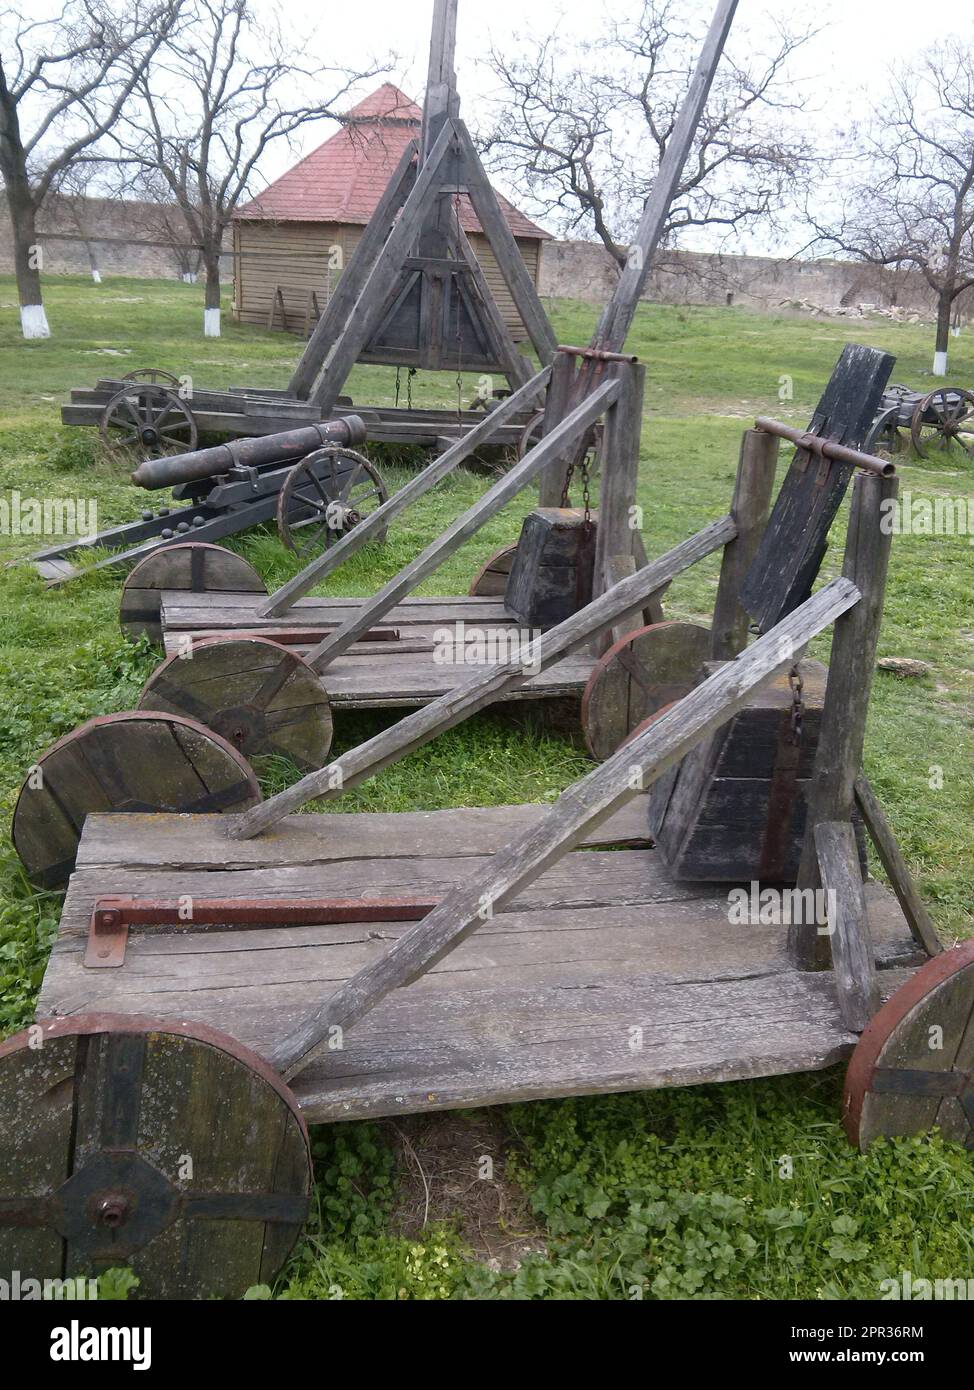 Medieval historical reconstruction, wooden catapults, balistas. Medieval siege weapon.  Stock Photo